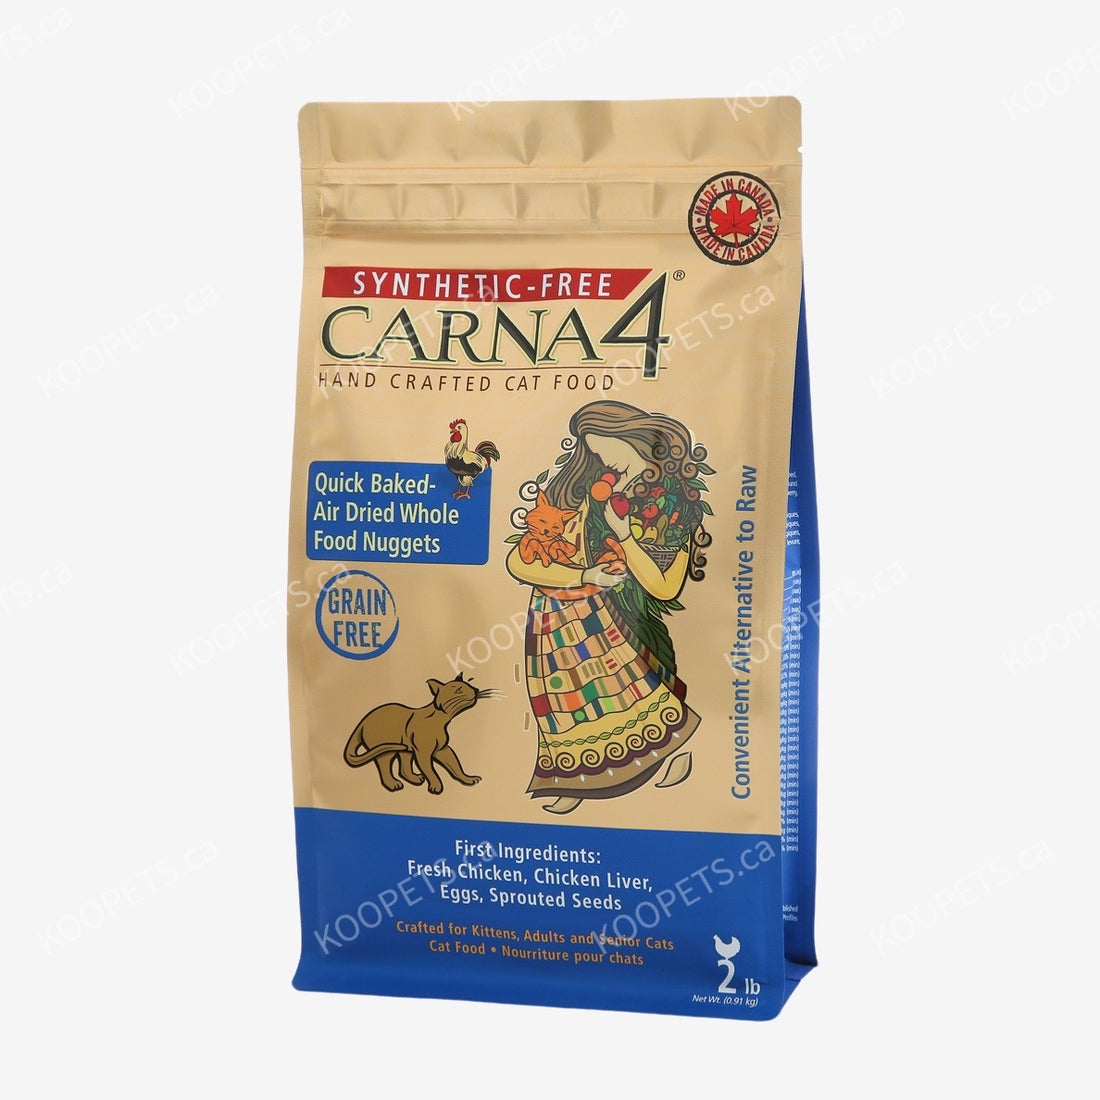 Carna4 | Hand Crafted Cat Dry Food